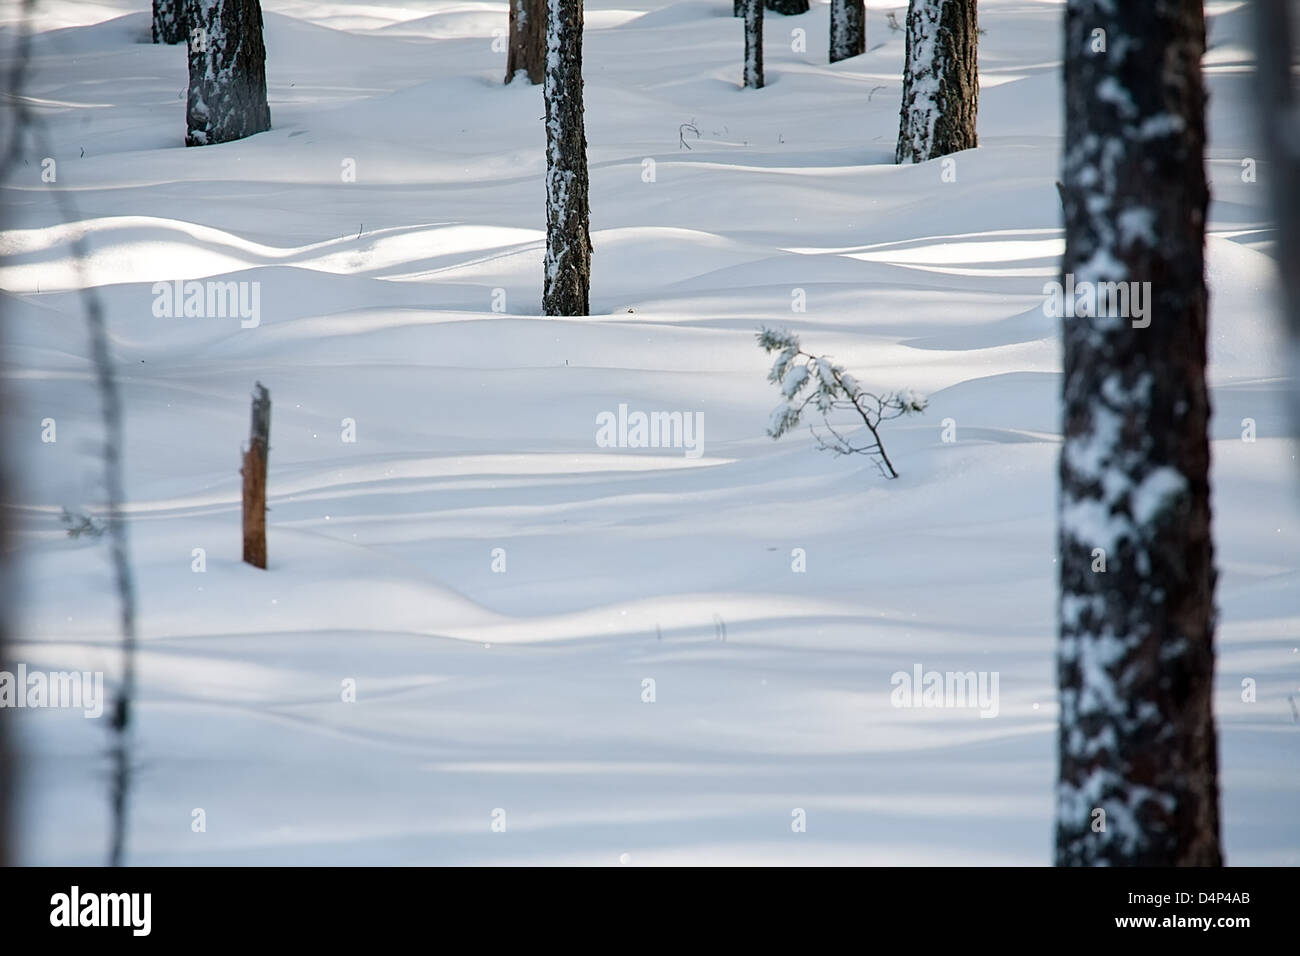 pattern of light and shadow on snow surface in winter forest Stock Photo